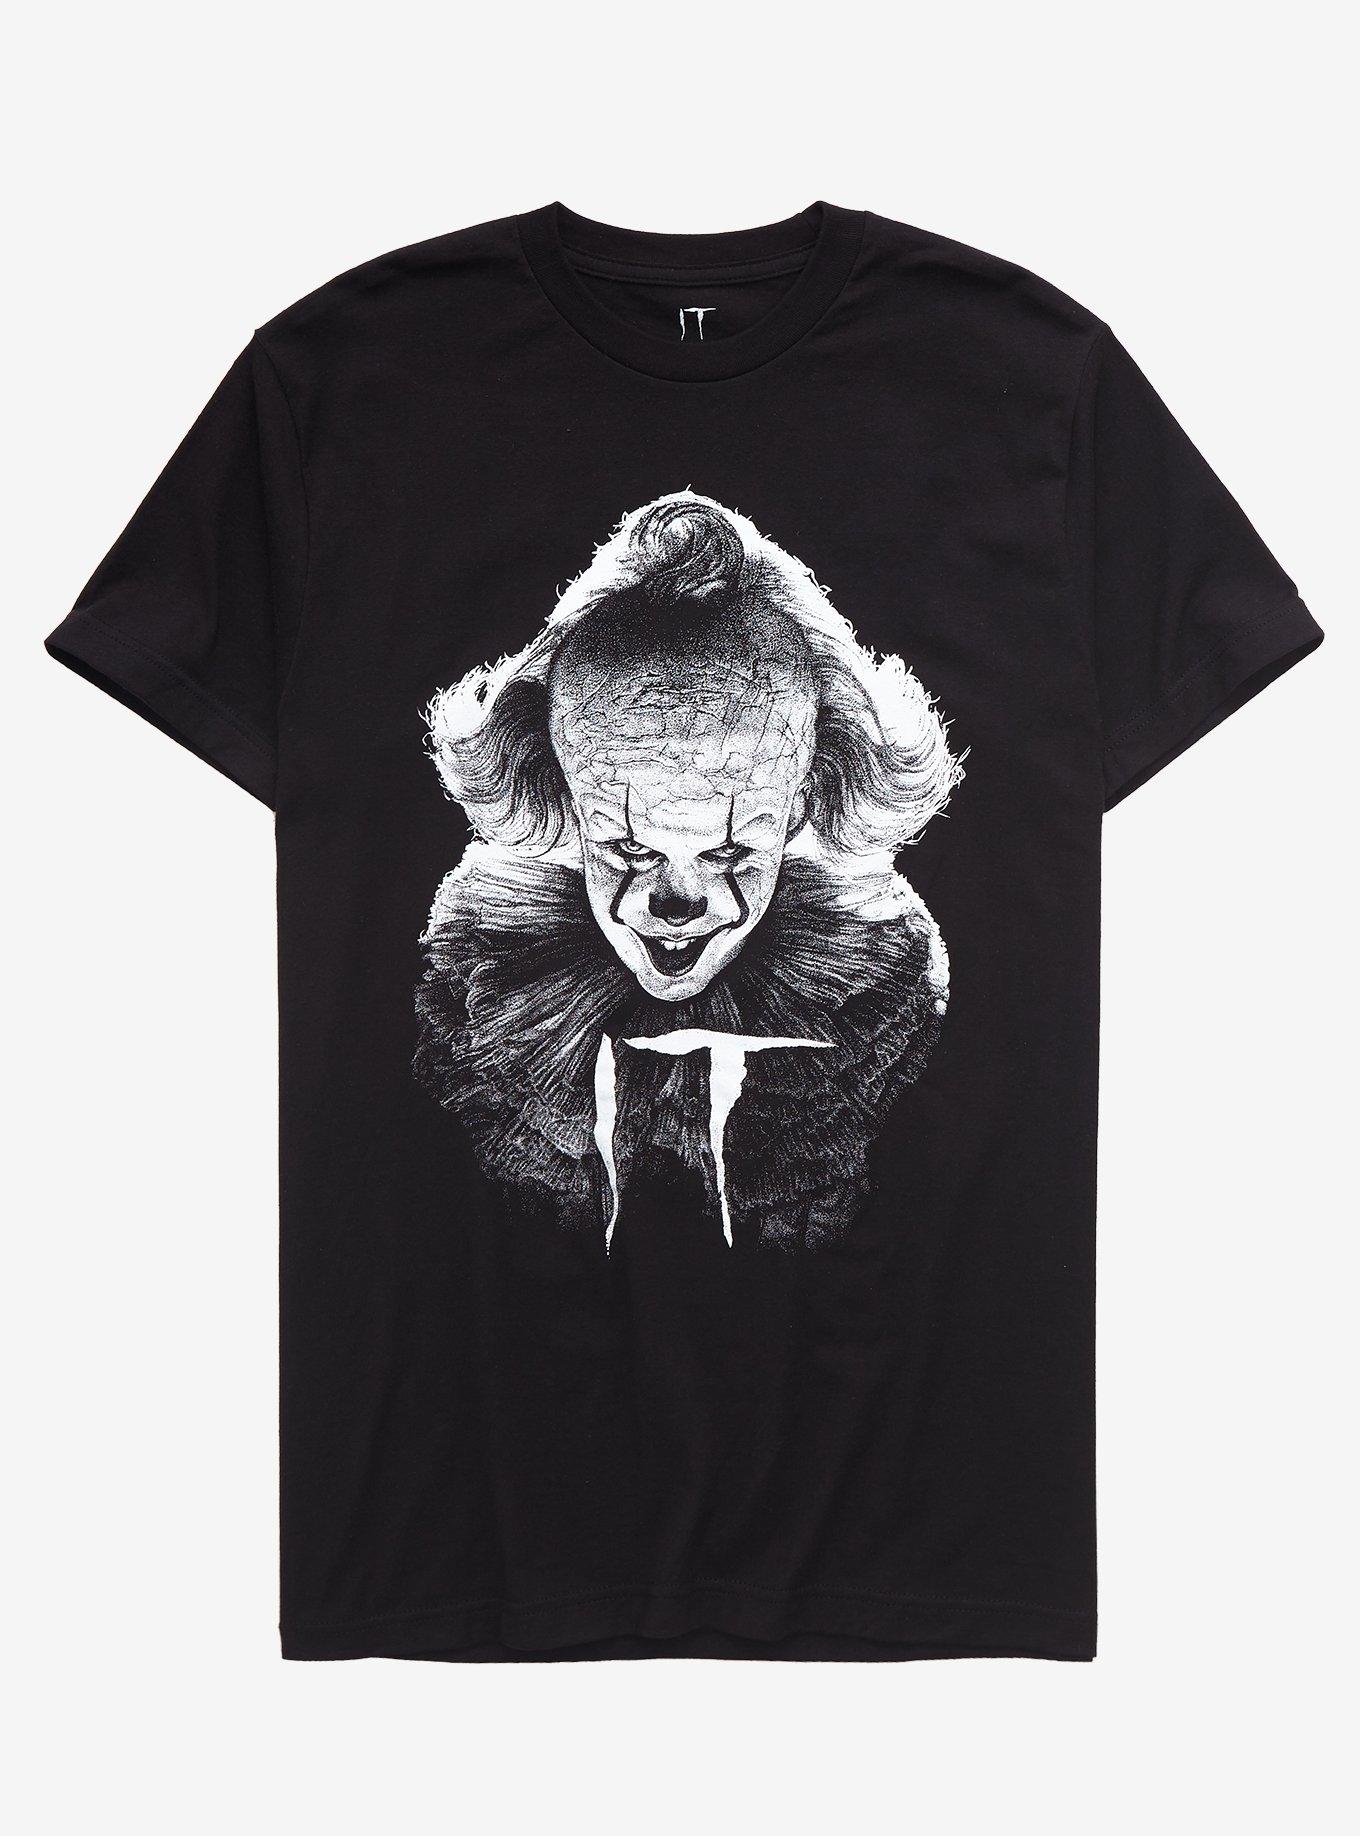 IT Pennywise Losers Club Two-Sided T-Shirt, BLACK, hi-res